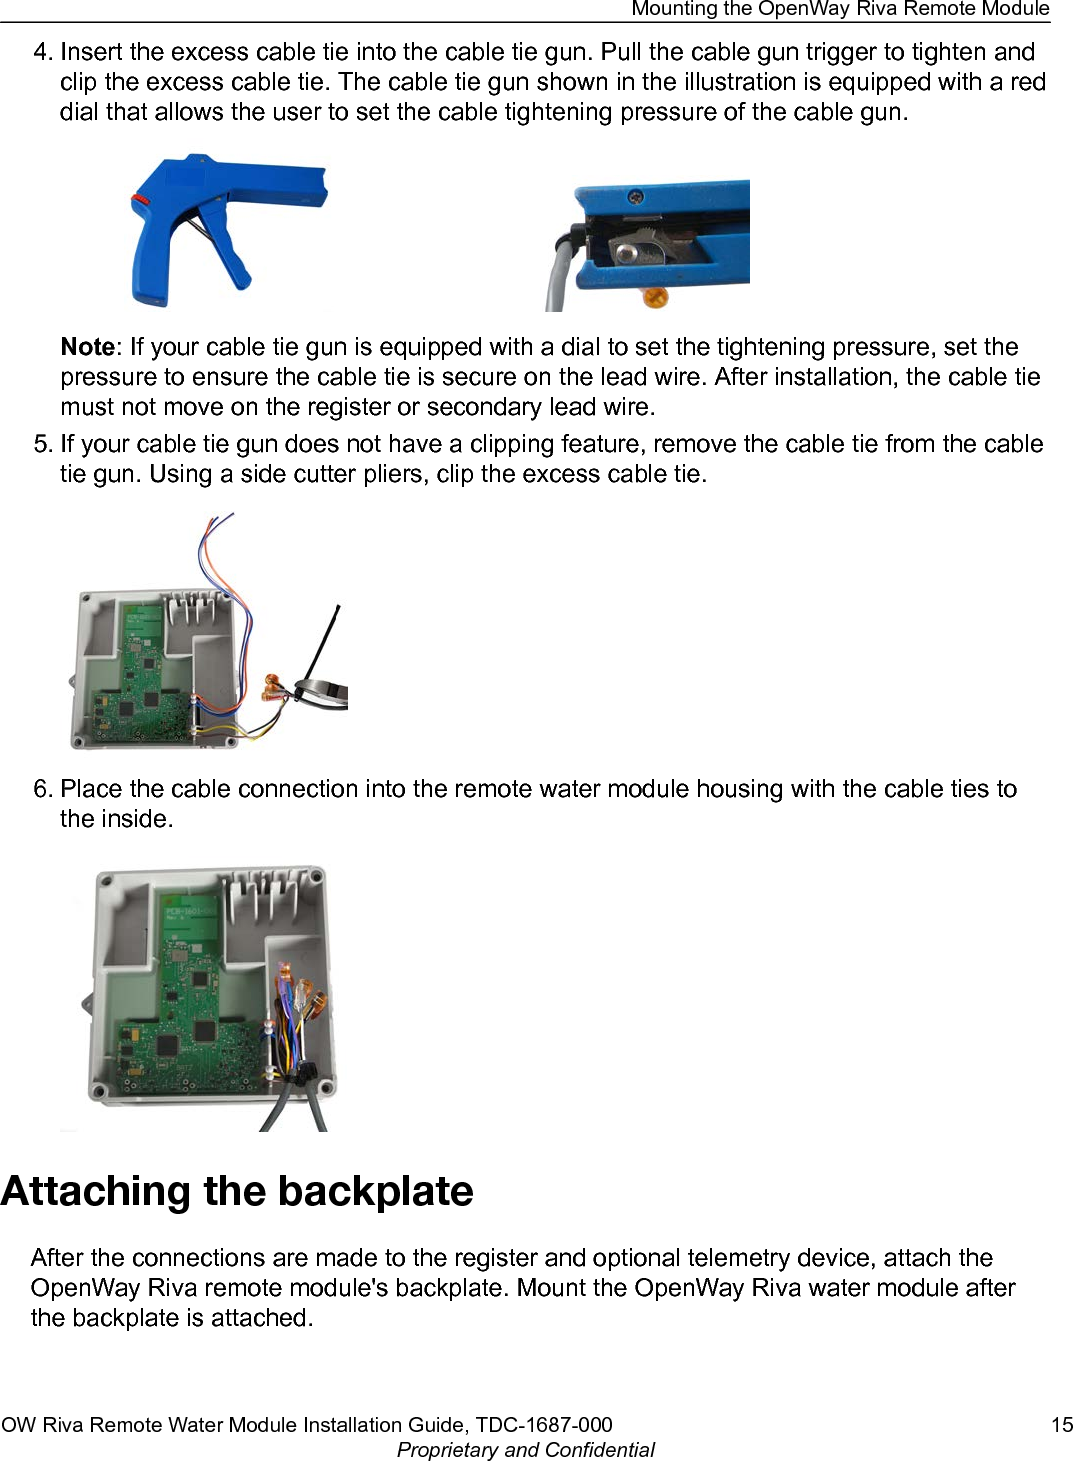 4. Insert the excess cable tie into the cable tie gun. Pull the cable gun trigger to tighten andclip the excess cable tie. The cable tie gun shown in the illustration is equipped with a reddial that allows the user to set the cable tightening pressure of the cable gun.Note: If your cable tie gun is equipped with a dial to set the tightening pressure, set thepressure to ensure the cable tie is secure on the lead wire. After installation, the cable tiemust not move on the register or secondary lead wire.5. If your cable tie gun does not have a clipping feature, remove the cable tie from the cabletie gun. Using a side cutter pliers, clip the excess cable tie.6. Place the cable connection into the remote water module housing with the cable ties tothe inside.Attaching the backplateAfter the connections are made to the register and optional telemetry device, attach theOpenWay Riva remote module&apos;s backplate. Mount the OpenWay Riva water module afterthe backplate is attached.Mounting the OpenWay Riva Remote ModuleOW Riva Remote Water Module Installation Guide, TDC-1687-000 15Proprietary and Confidential